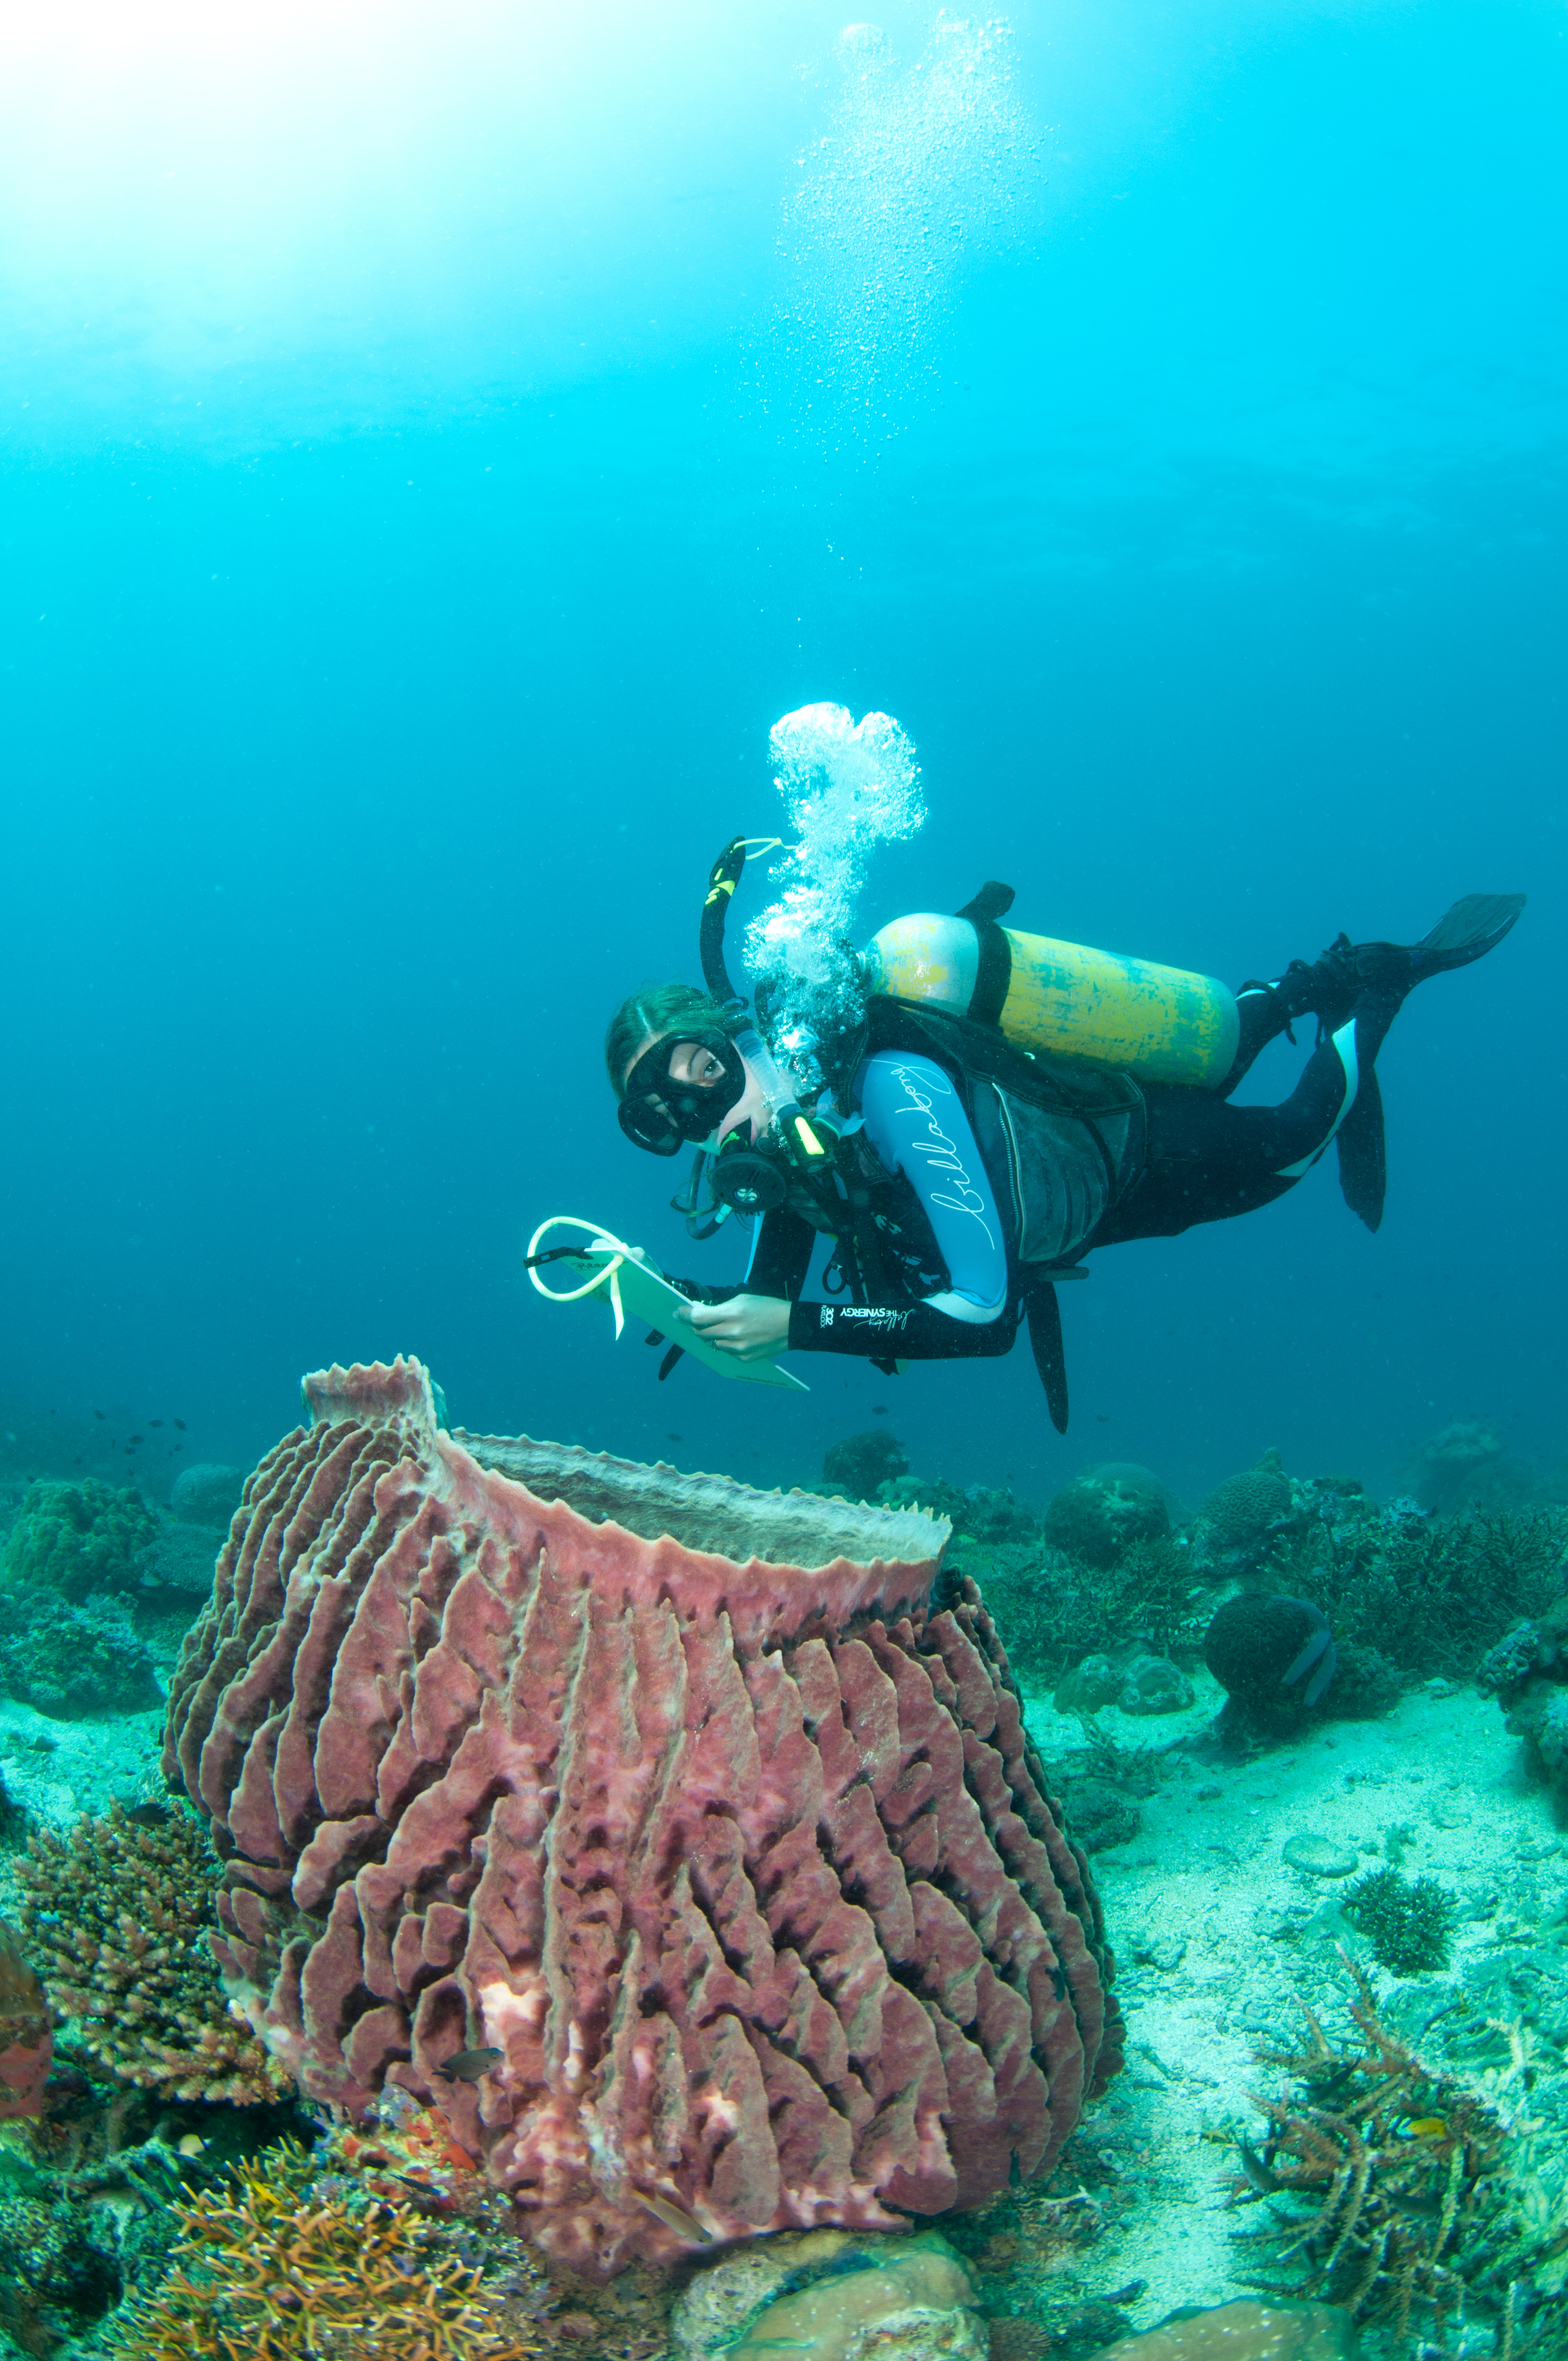 A marine volunteer mid survey in the Philippines